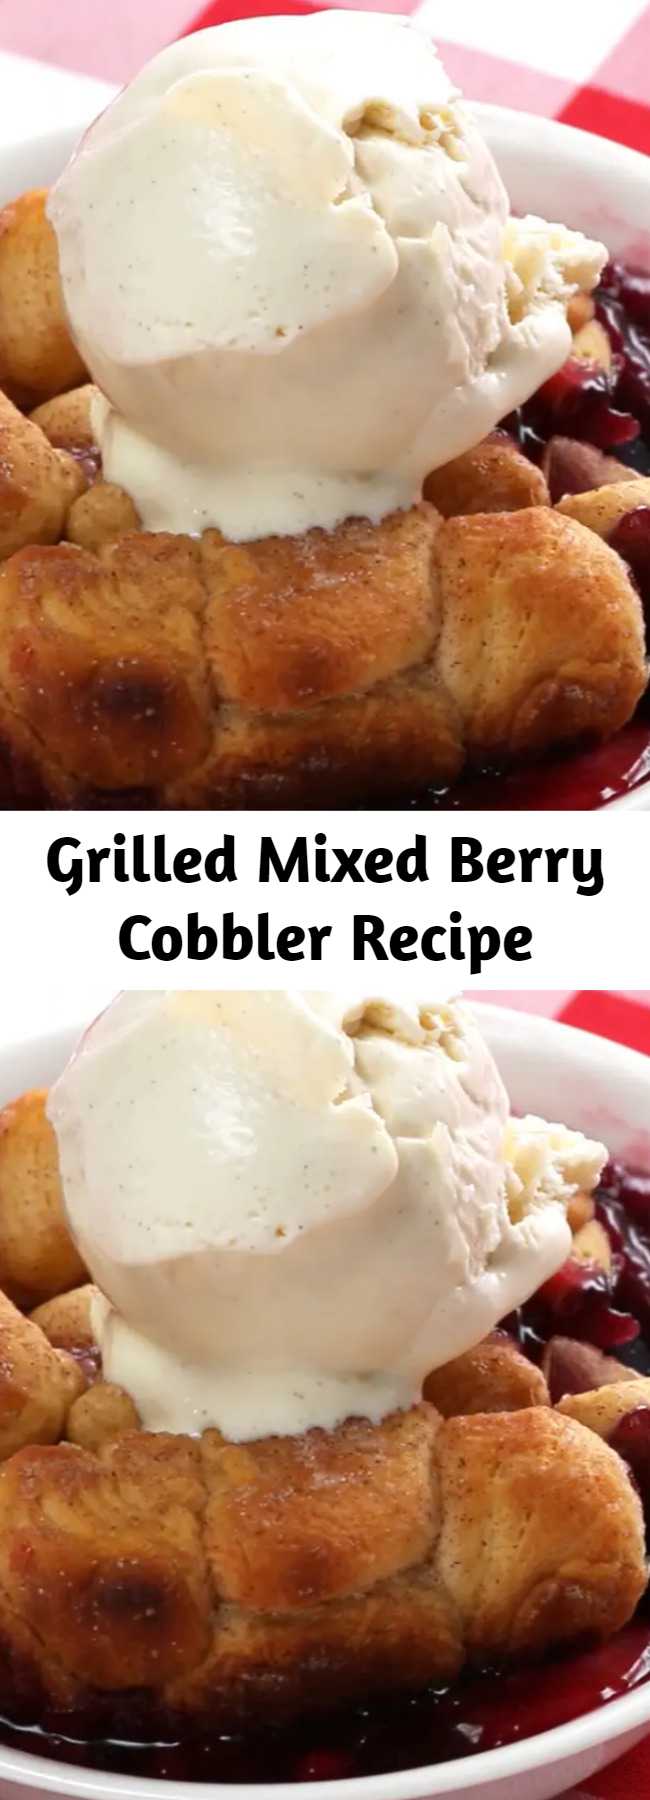 Grilled Mixed Berry Cobbler Recipe - Try Out Your Grill And Make This Incredible Mixed Berry Cobbler.